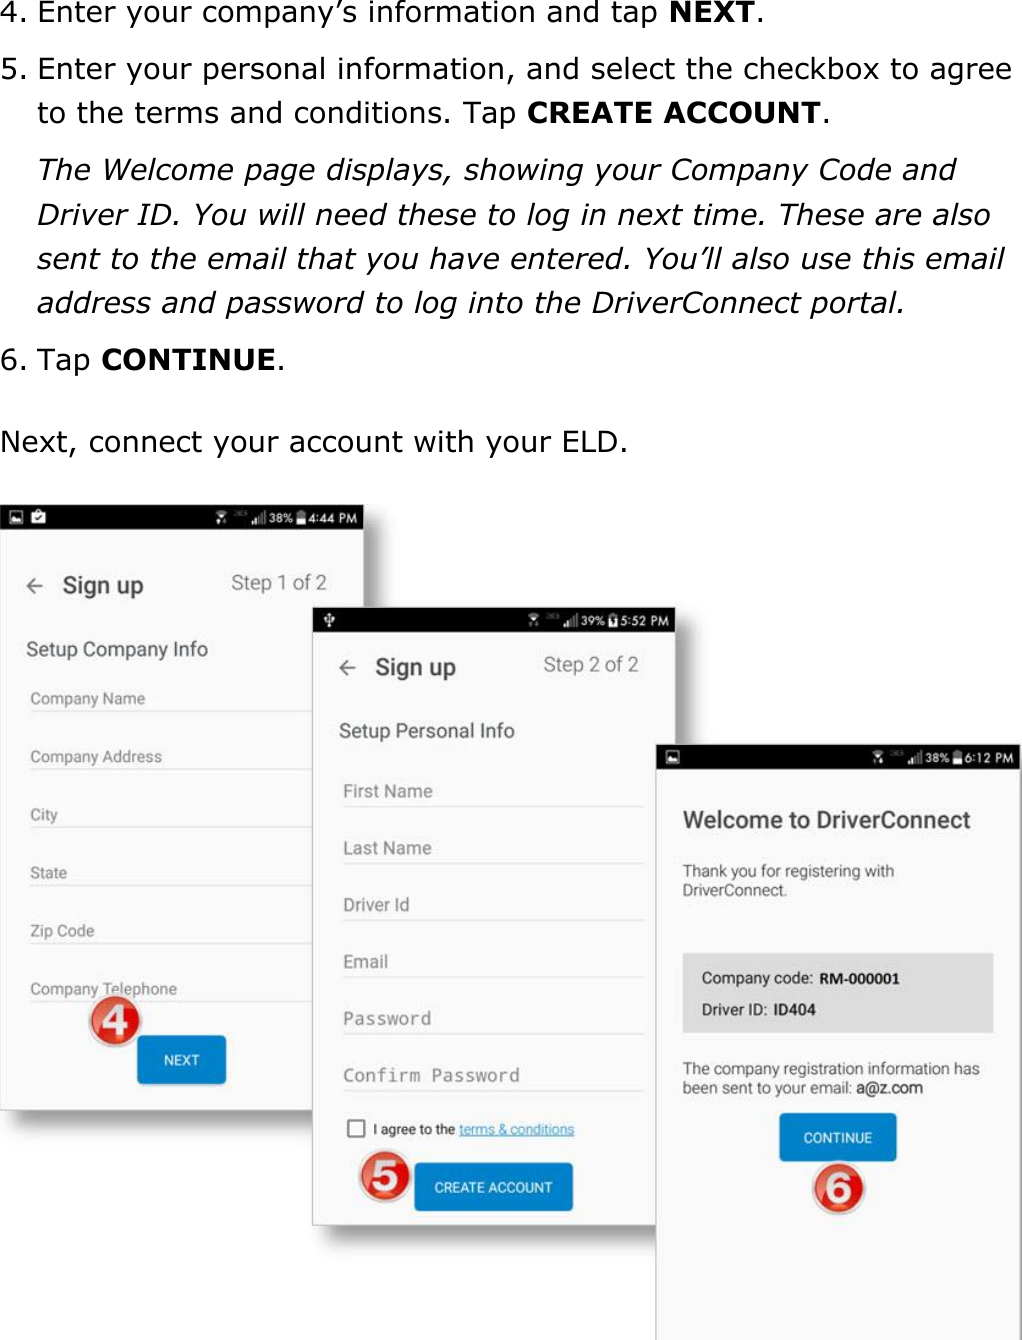 Set My Duty Status DriverConnect User Guide  11 © 2017, Rand McNally, Inc. 4. Enter your company’s information and tap NEXT. 5. Enter your personal information, and select the checkbox to agree to the terms and conditions. Tap CREATE ACCOUNT. The Welcome page displays, showing your Company Code and Driver ID. You will need these to log in next time. These are also sent to the email that you have entered. You’ll also use this email address and password to log into the DriverConnect portal. 6. Tap CONTINUE. Next, connect your account with your ELD.  